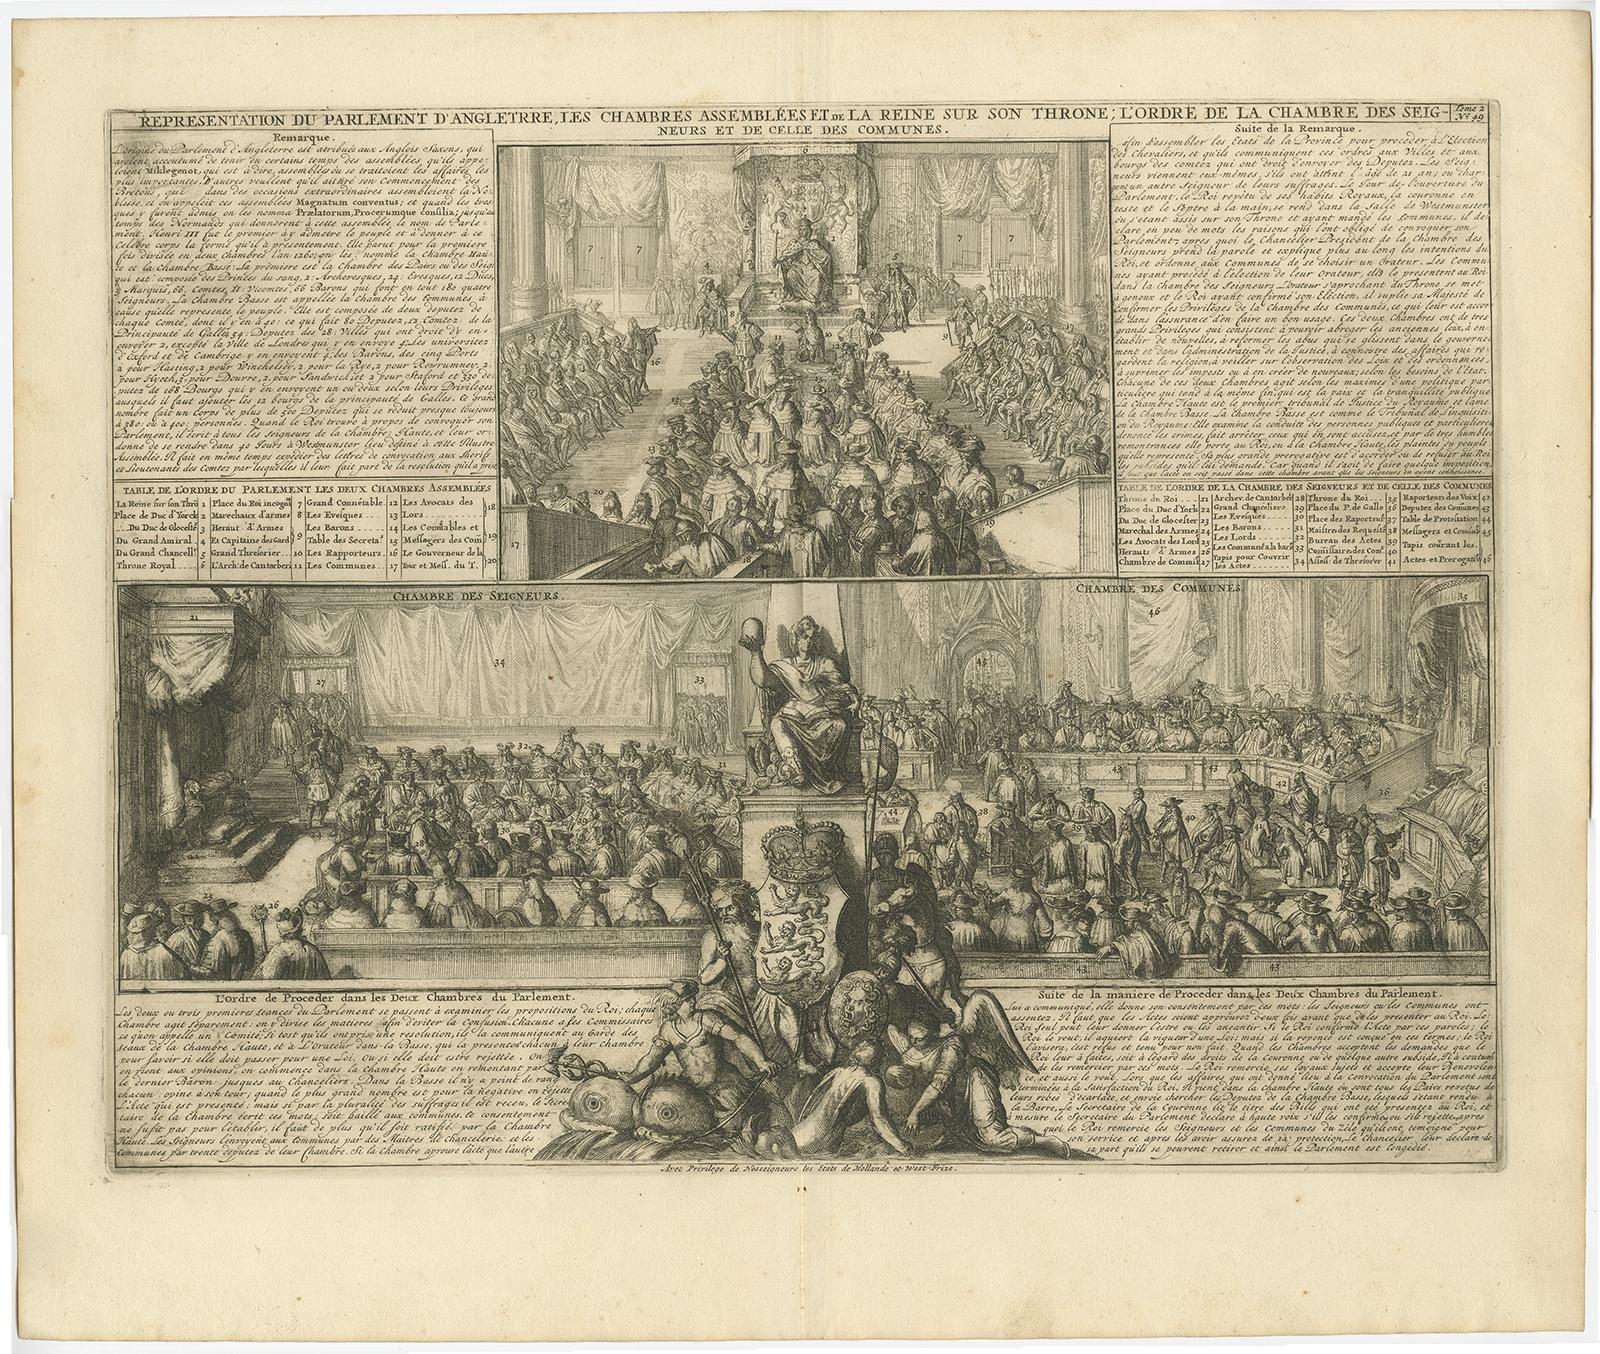 Antique print titled 'Representation du Parlement d'Angletrre (..)'. 

Series of scenes, which include from the British Parliament and an assembly before the King of England. This print orginates from 'Atlas Historique'. 

Artists and Engravers: